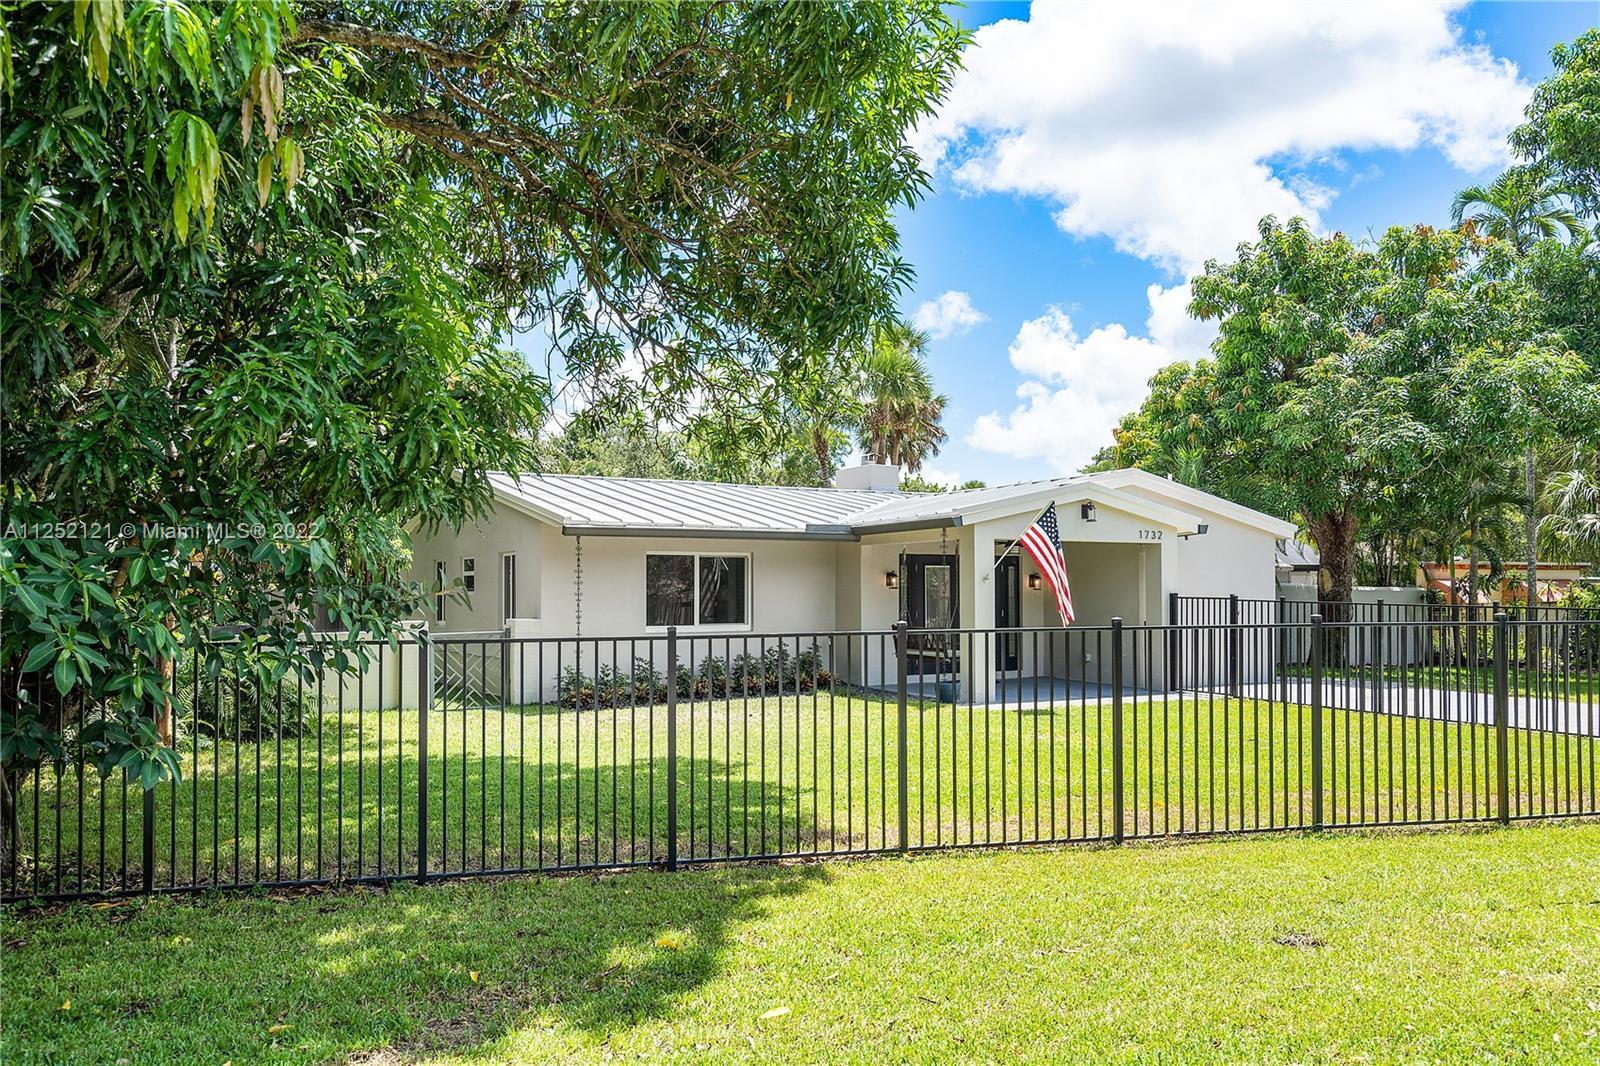 Tastefully reimagined 3 bedroom, 2 bathroom home situated in the coveted Shady Banks neighborhood of